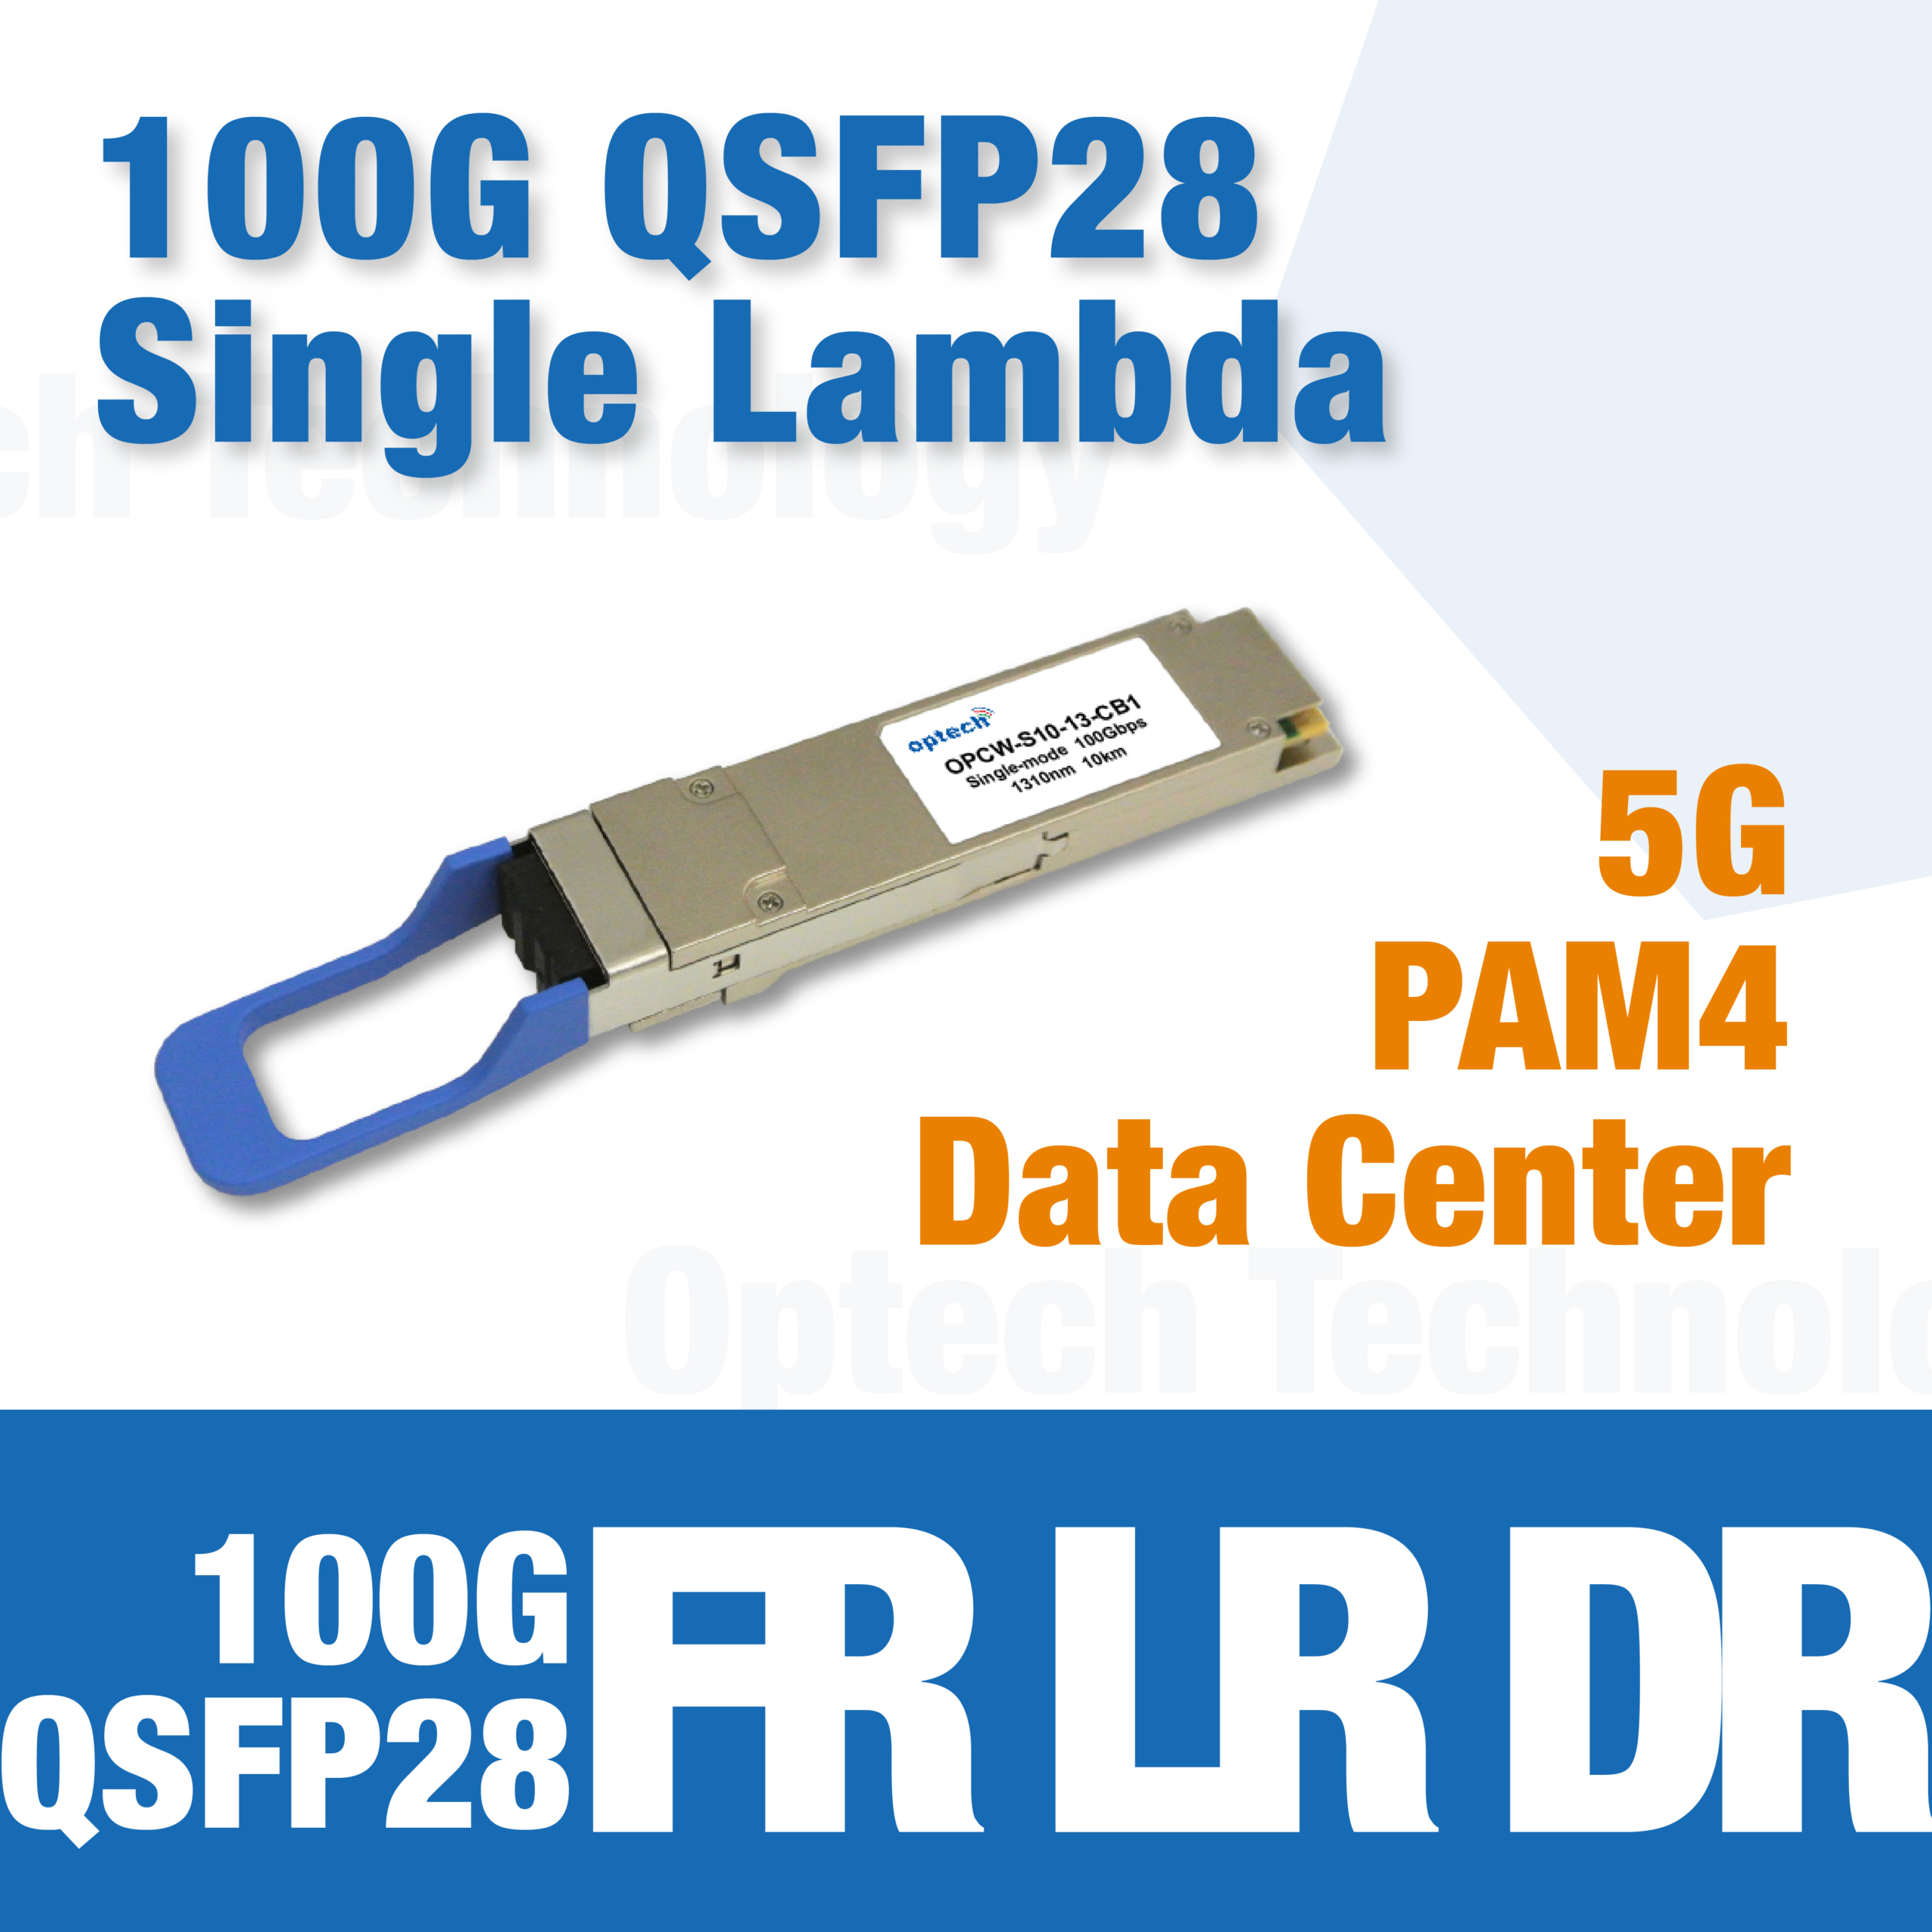 What are 100G QSFP28 single lambda optical transceivers?